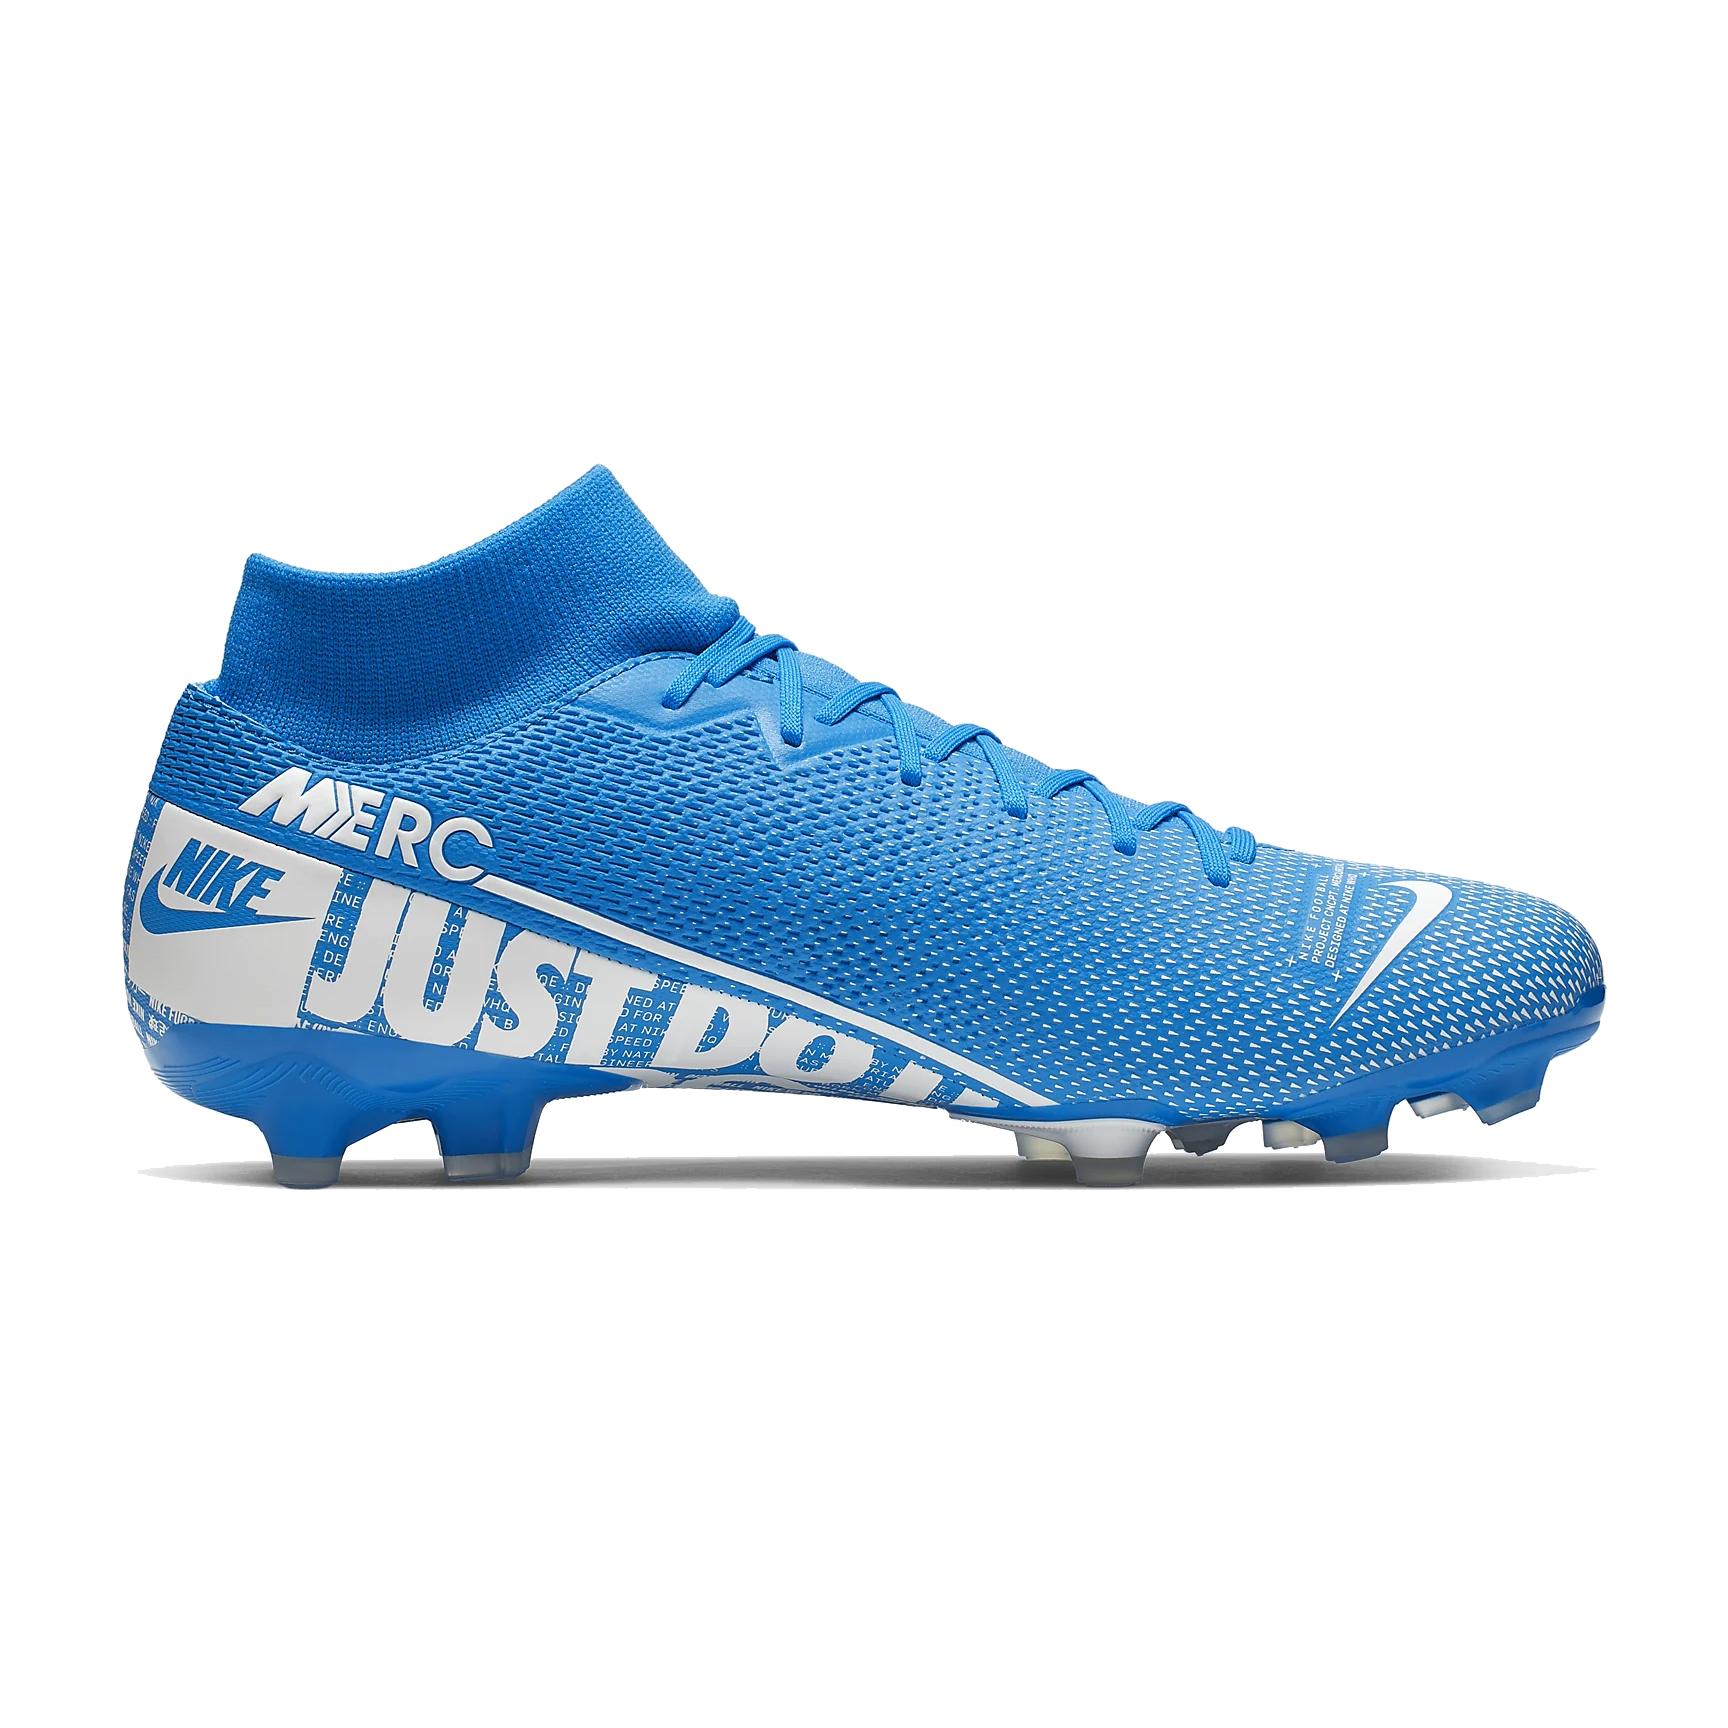 just do it football boots